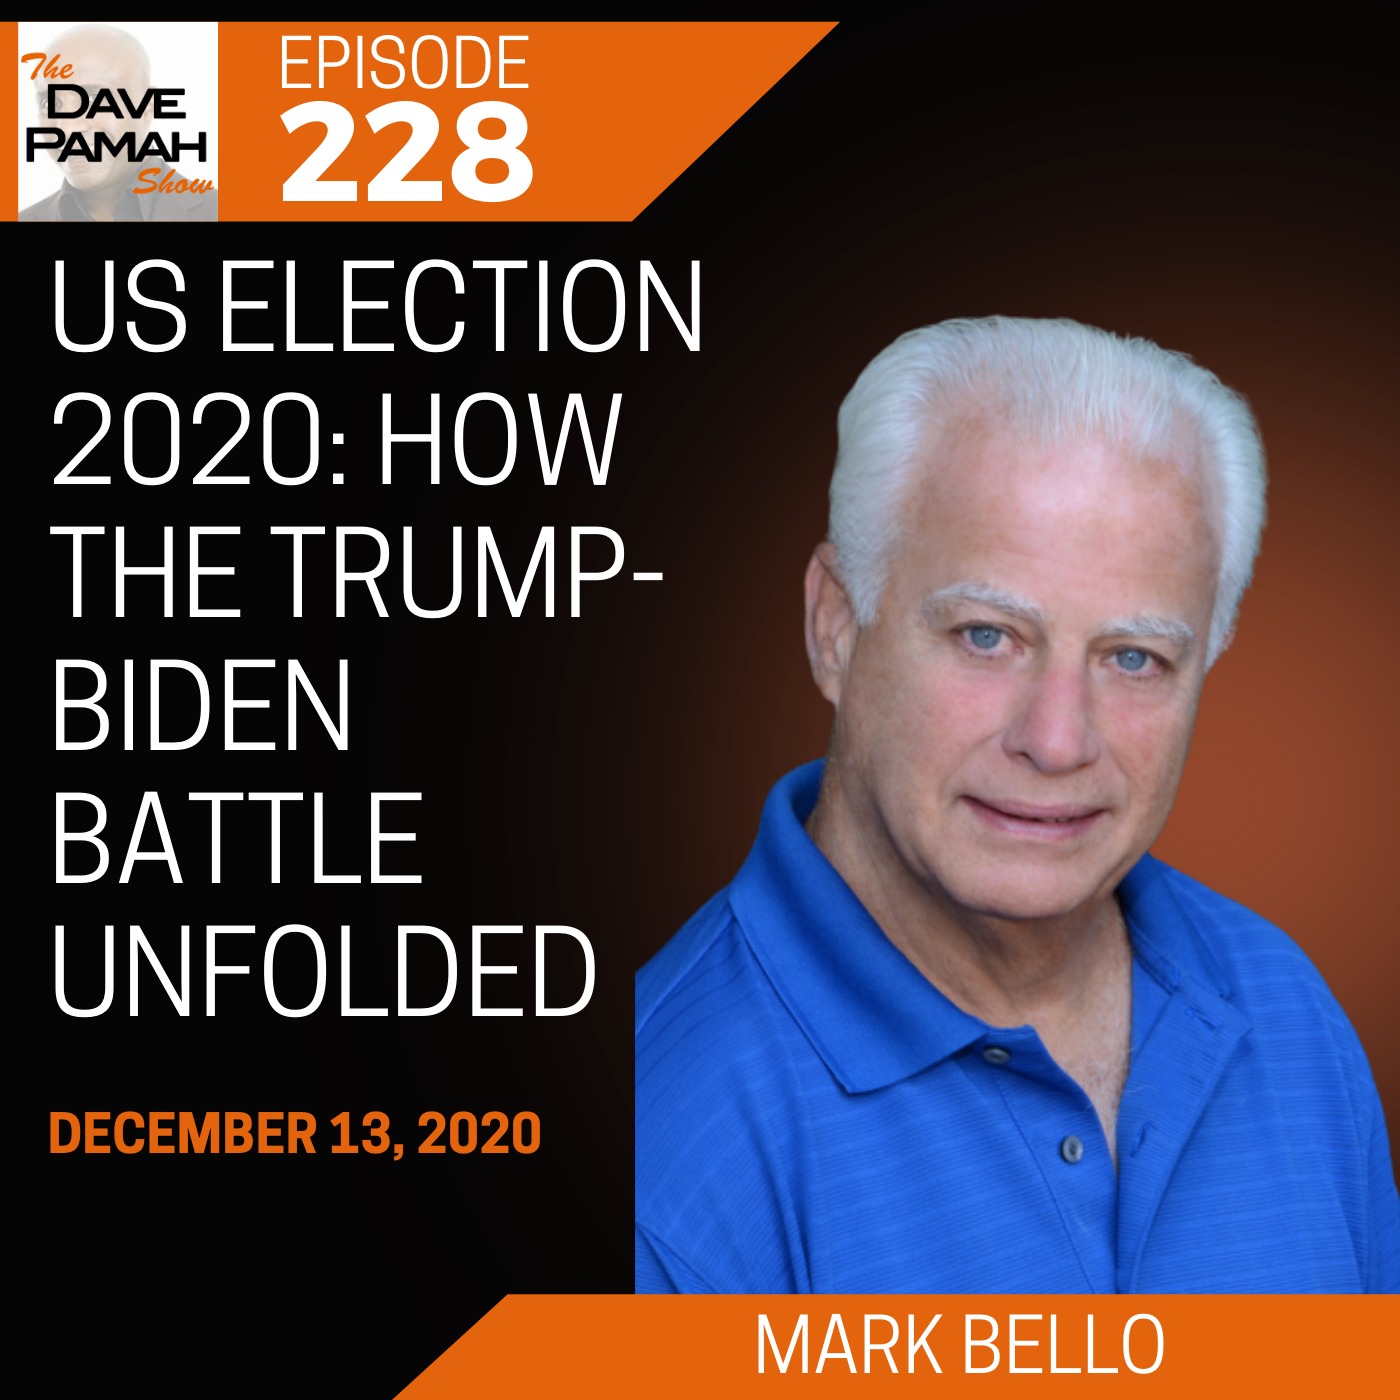 US election 2020: How the Trump-Biden battle unfolded with Mark Bello Image